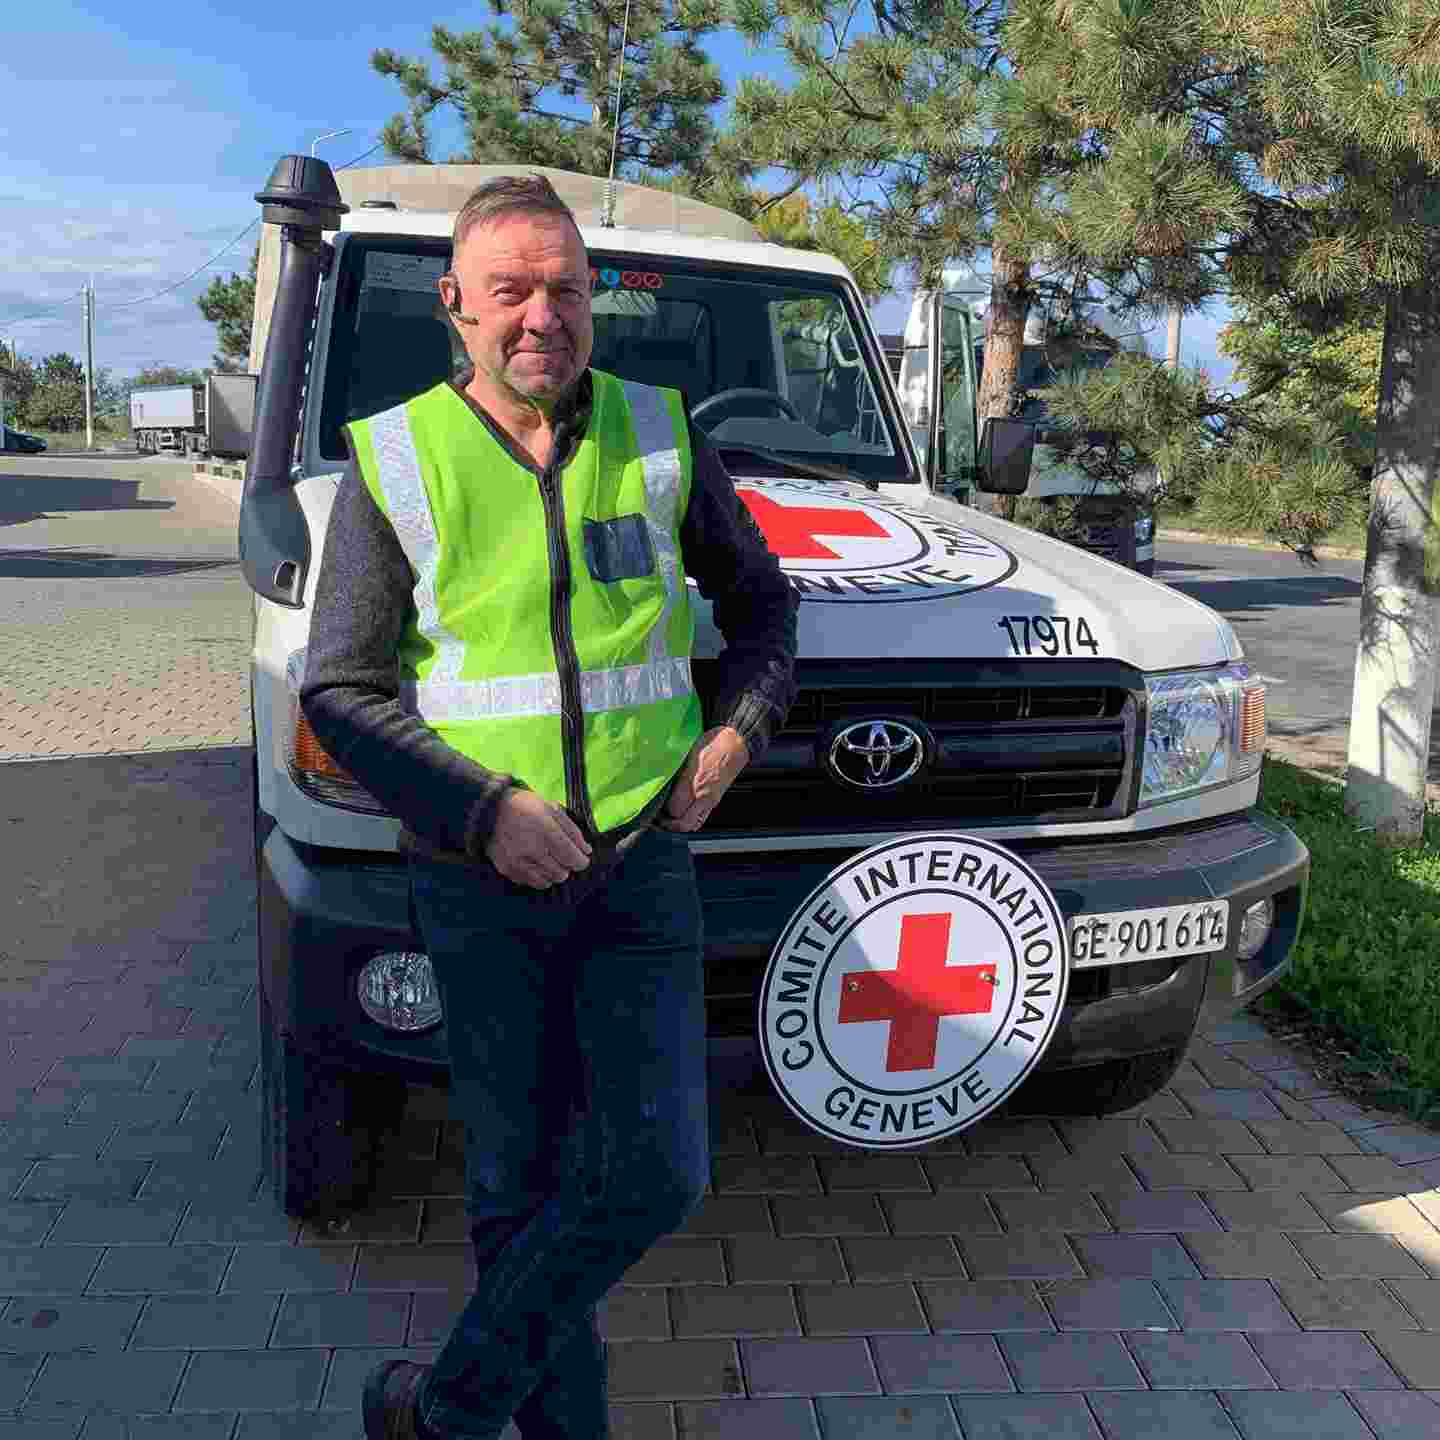 Aid worker Keijo Eklöf is smiling and standing in front of the International Committee of the Red Cross car.